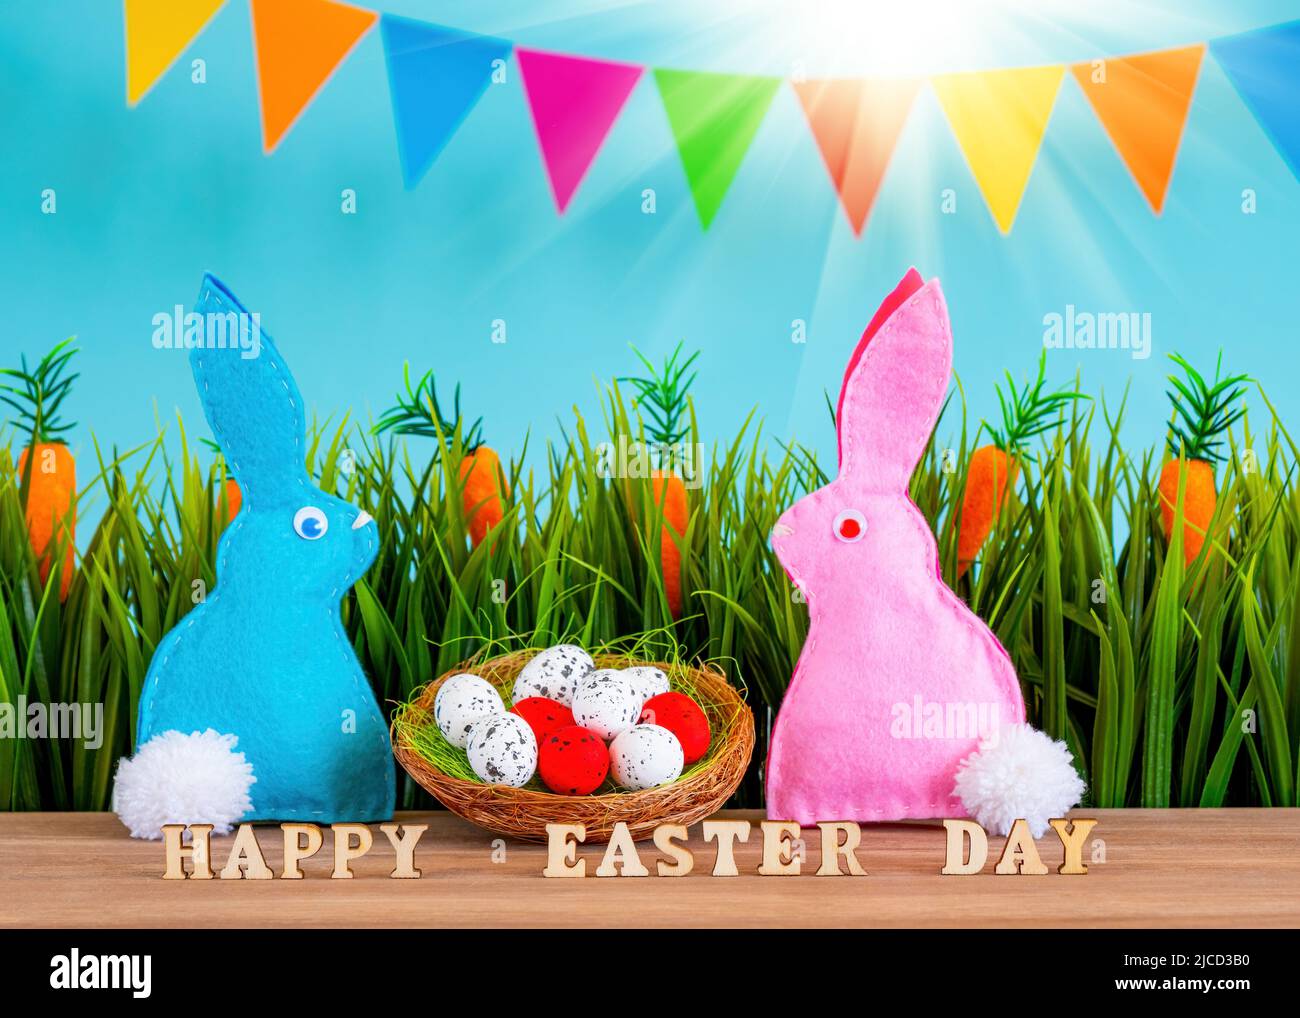 Easter background with eggs, rabbits and green grass Stock Photo